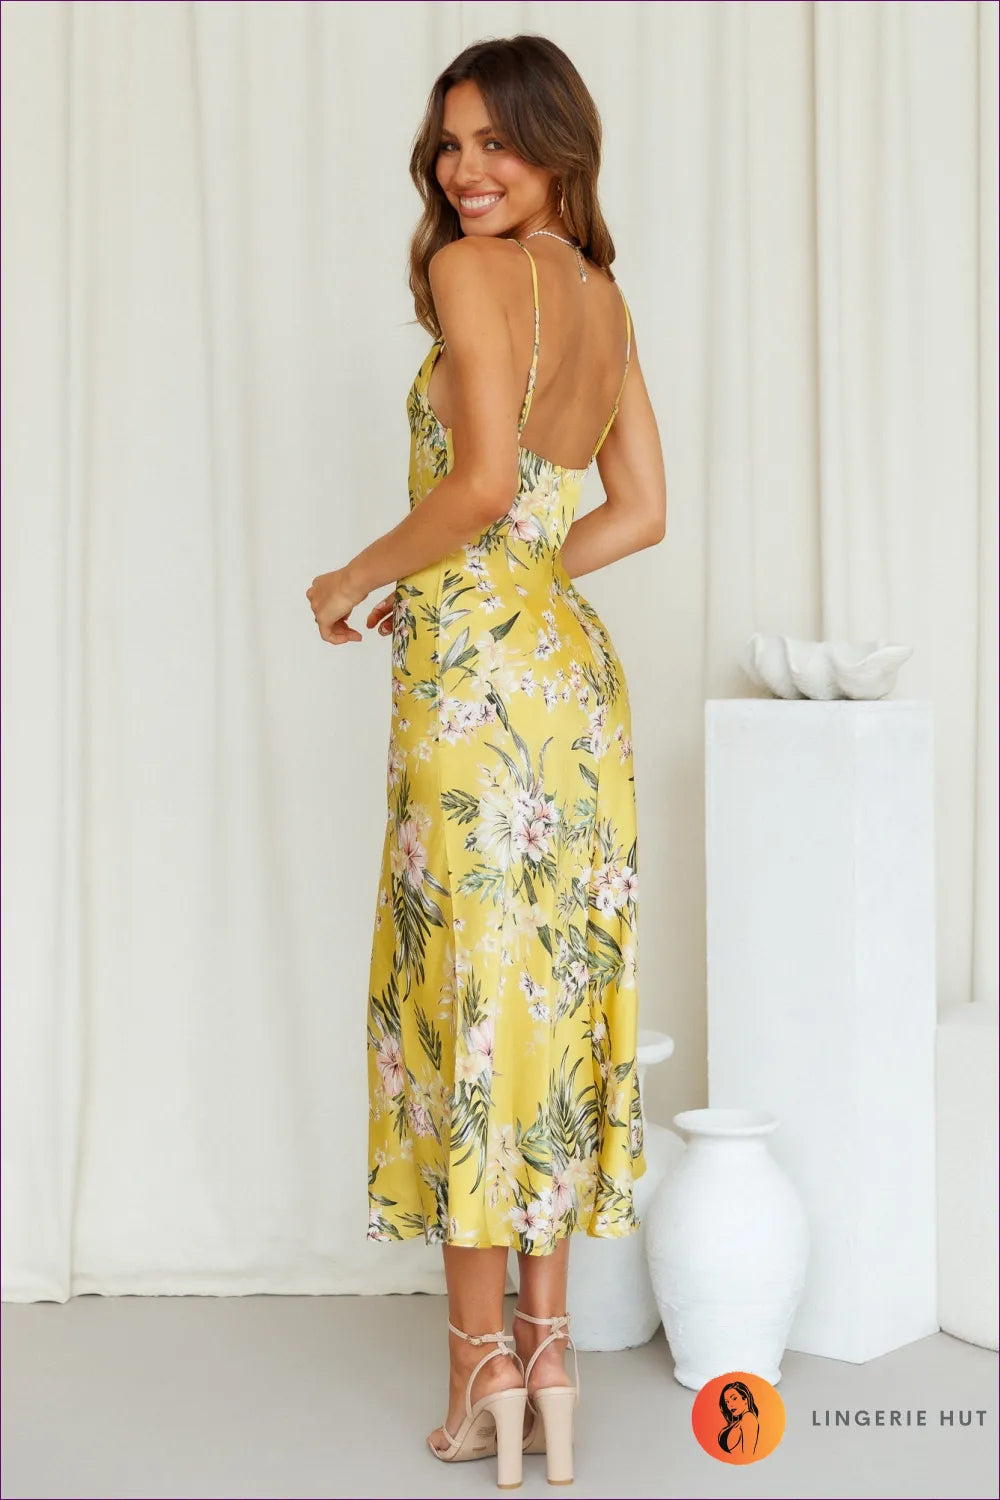 Elevate Your Summer Style With Our Boho Floral Maxi Dress. Perfect For Dreamers And Wanderers, It’s a Charming